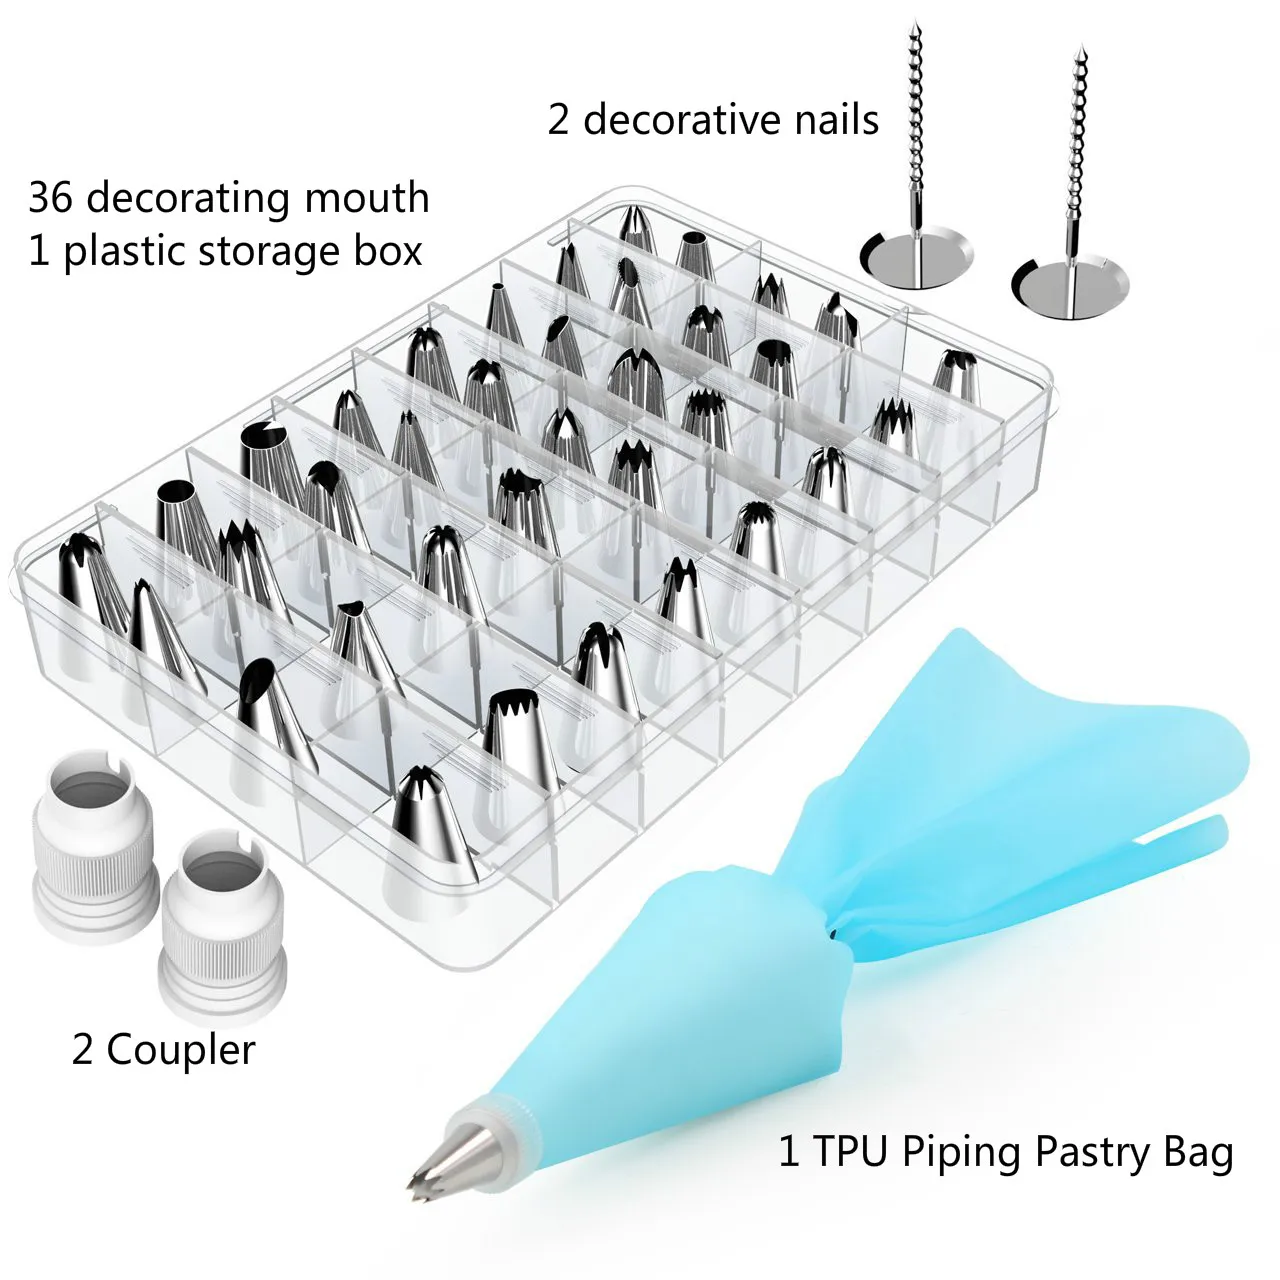 Silicone Kitchen Accessories Icing Piping Cream Pastry Bag 36 Stainless Steel Nozzle Set DIY Cake Decorating Tips Set